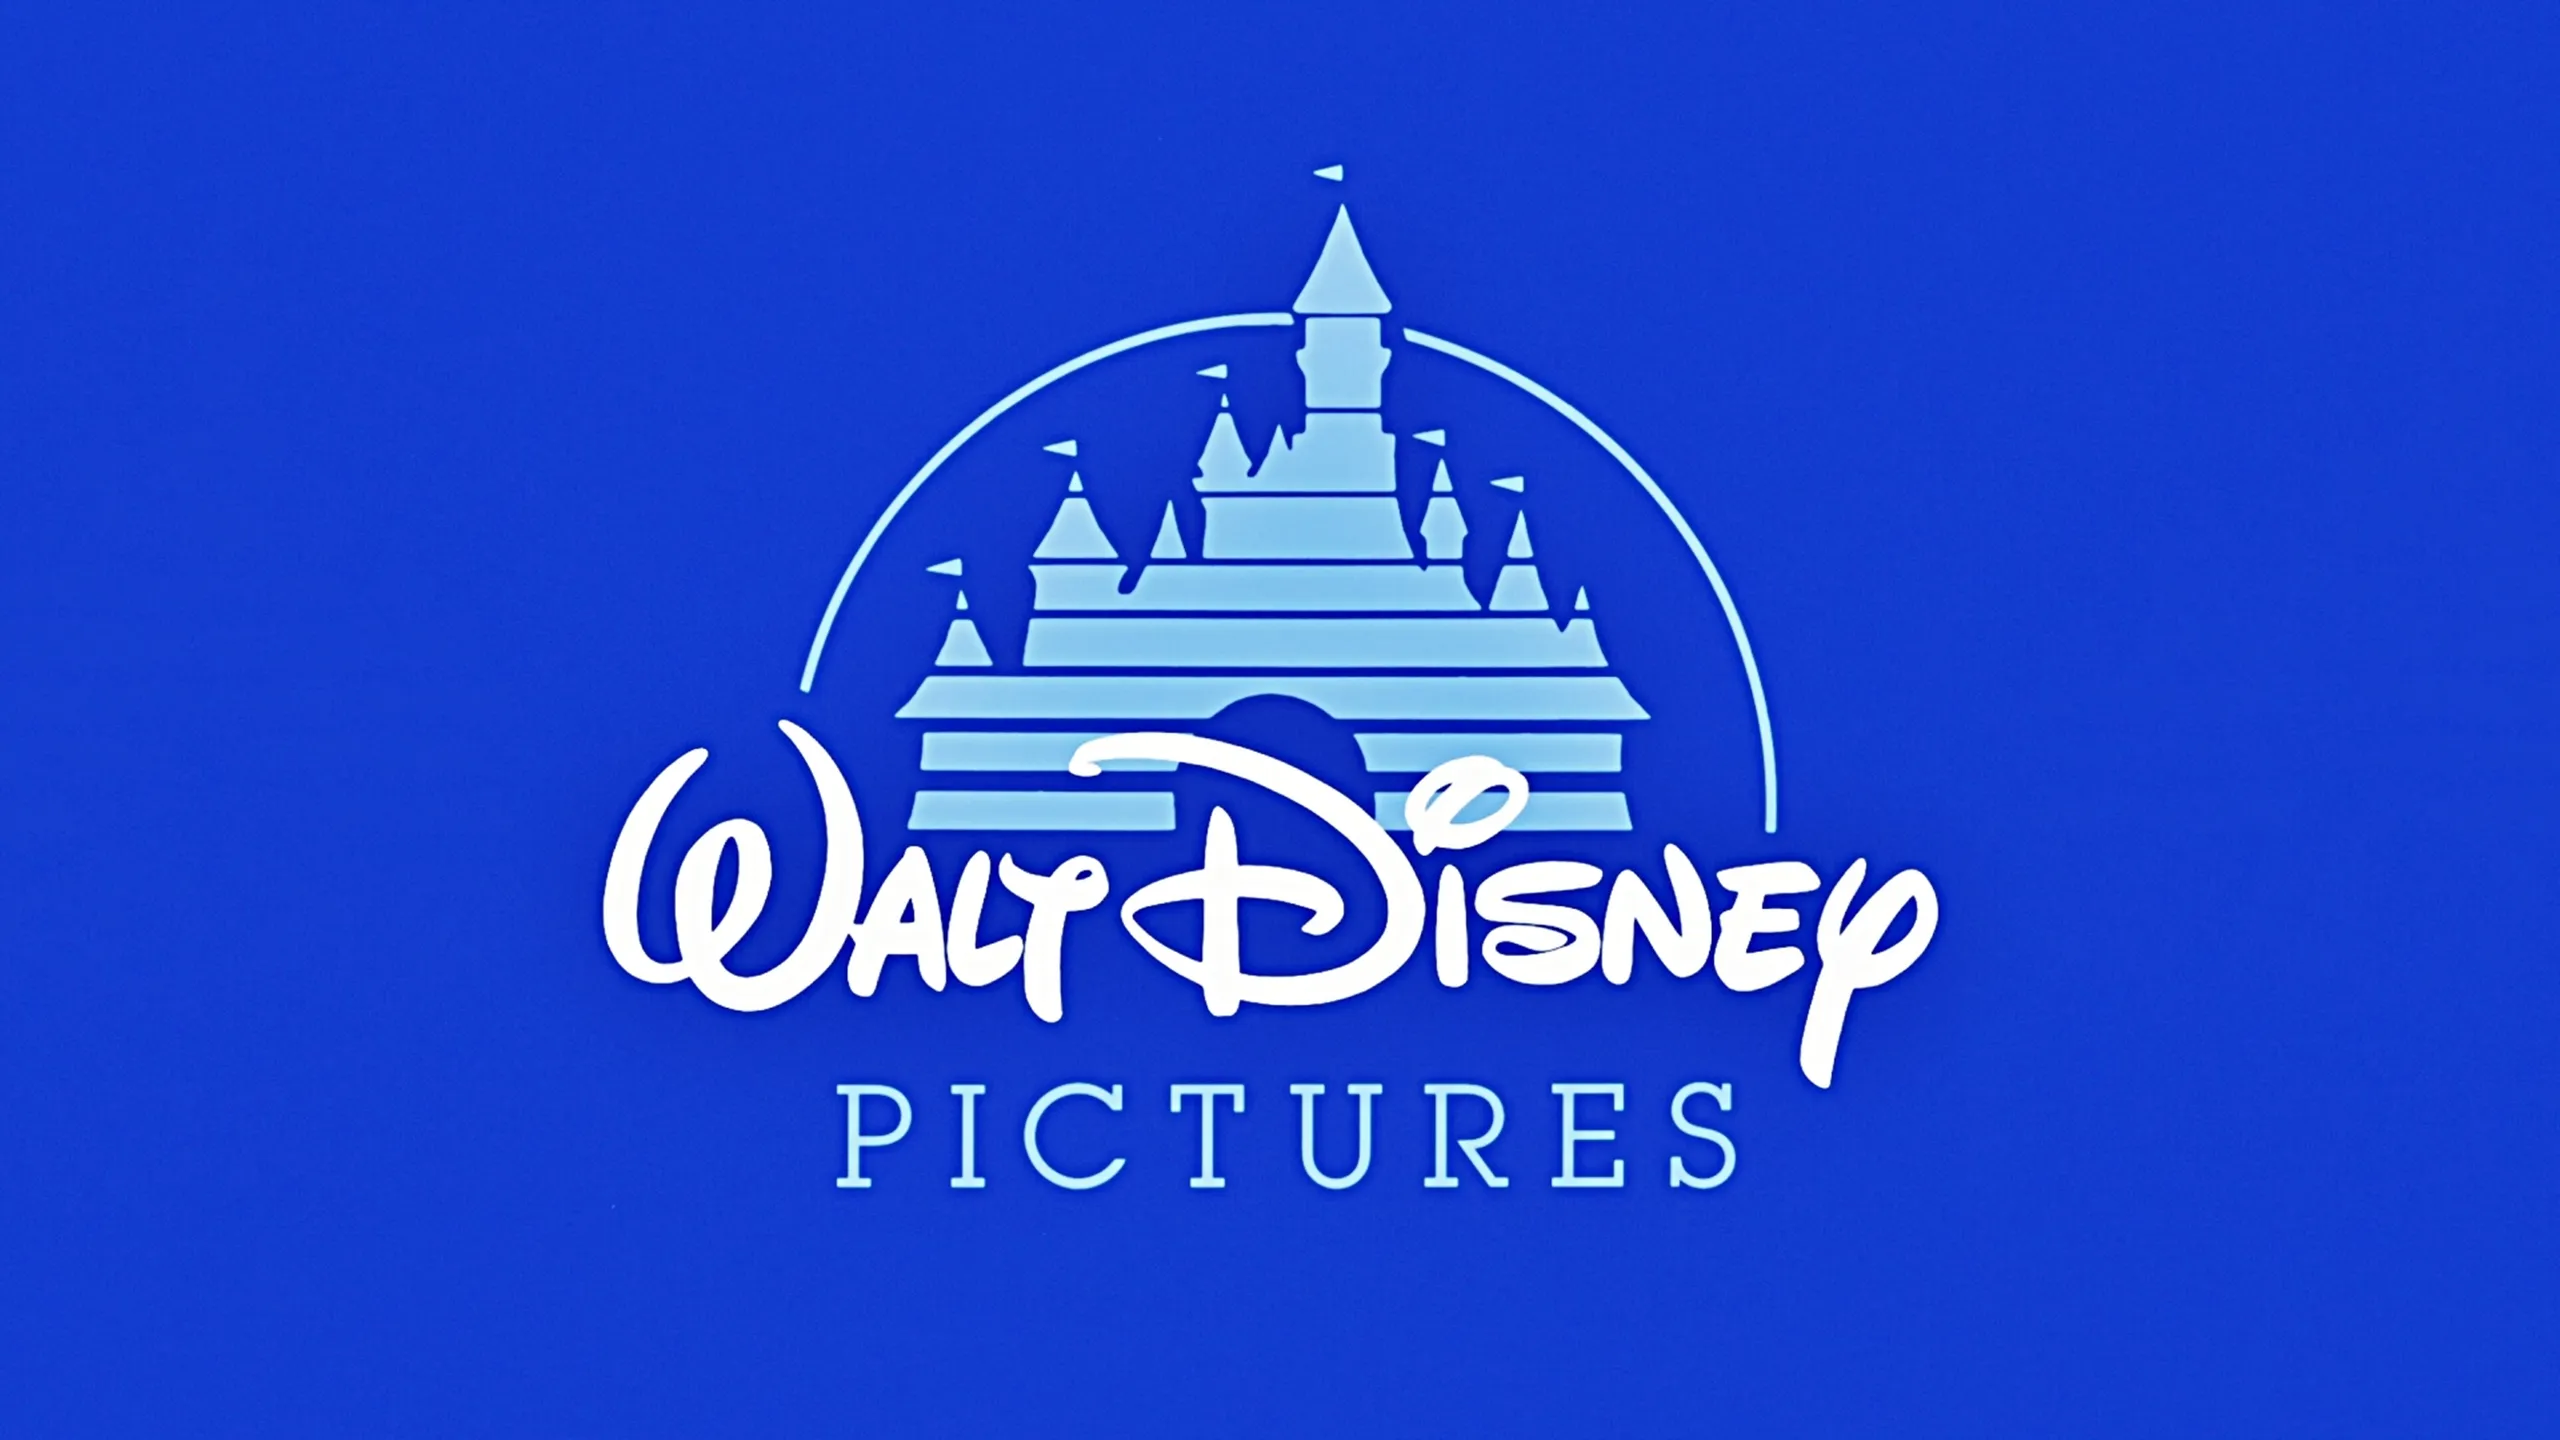 1923 -The Walt Disney Company is Founded